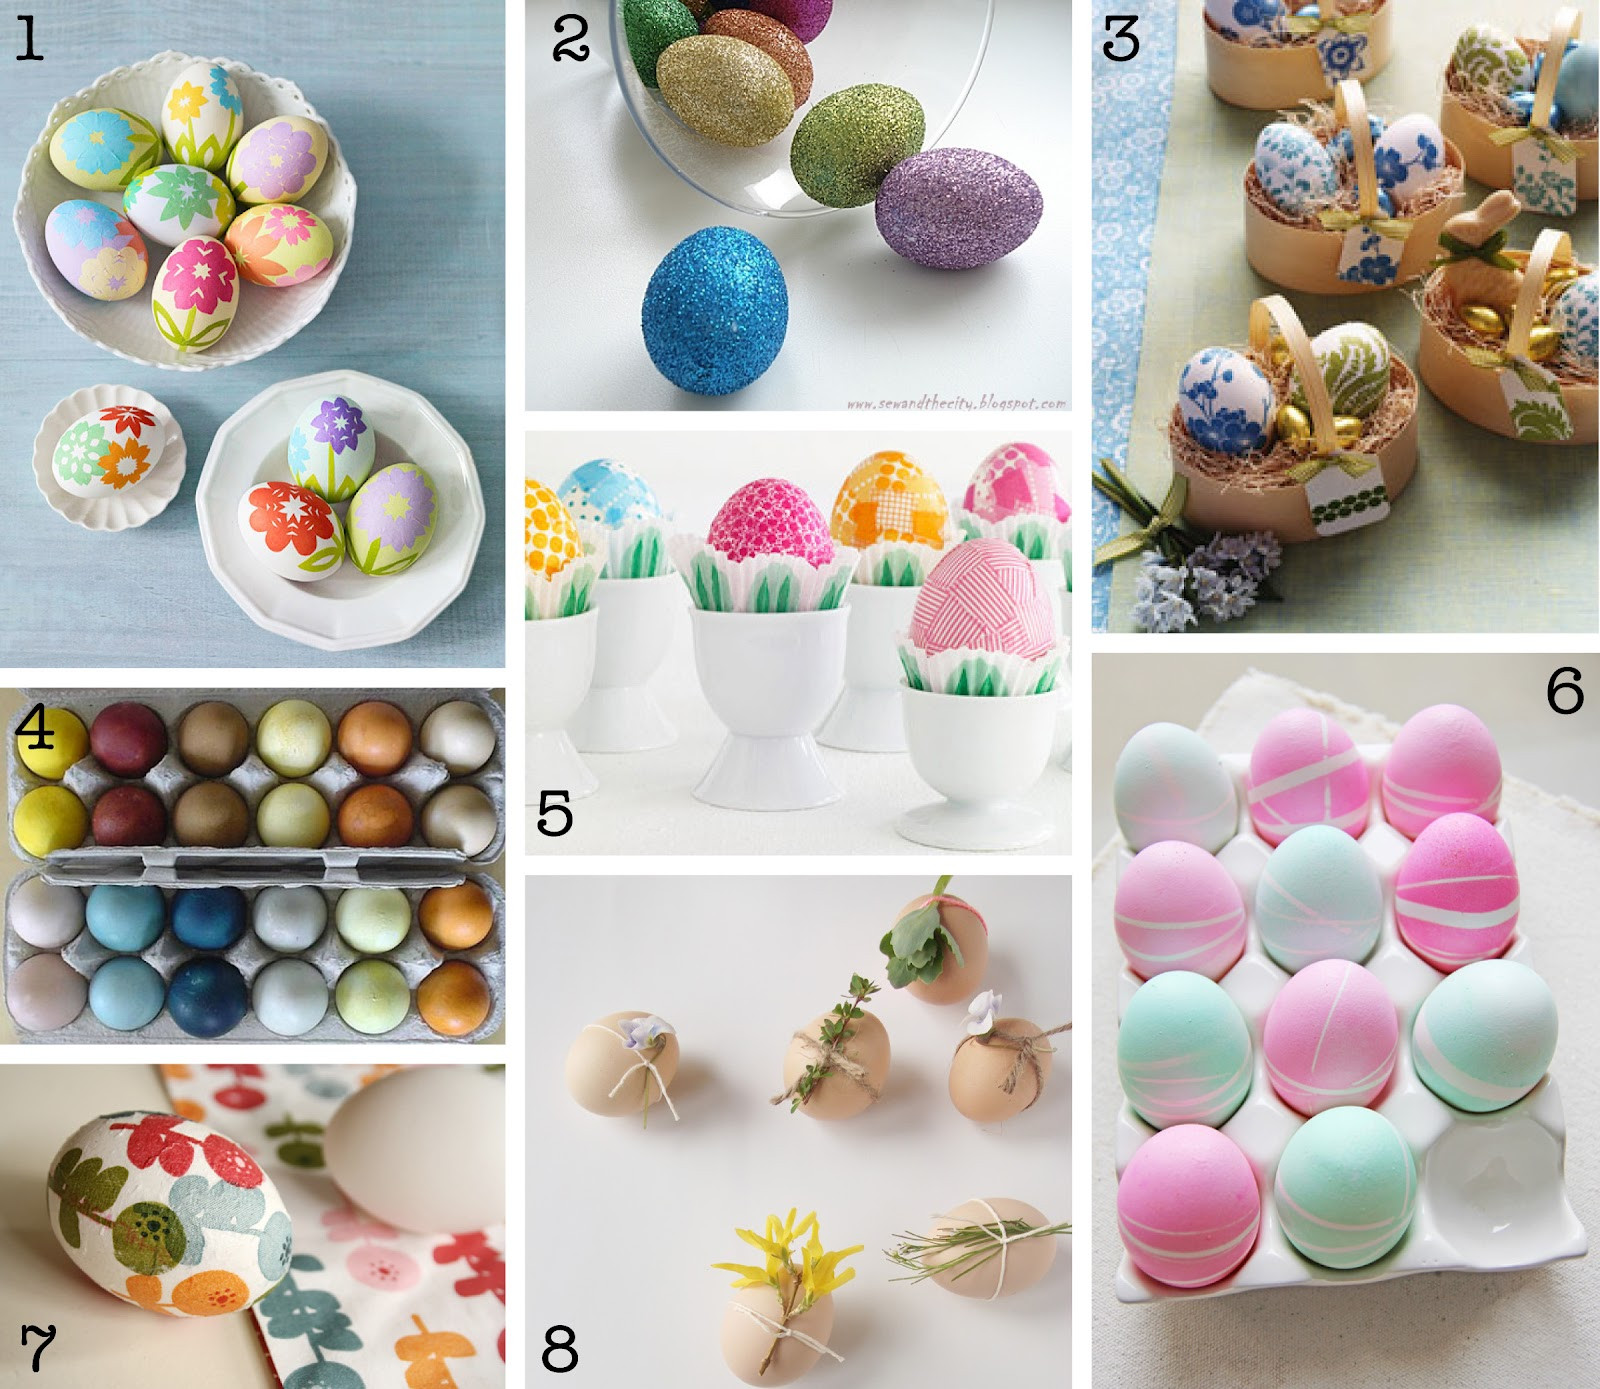 Easter Egg Decorating Ideas
 The Creative Place DIY Easter Egg Decorating Roundup